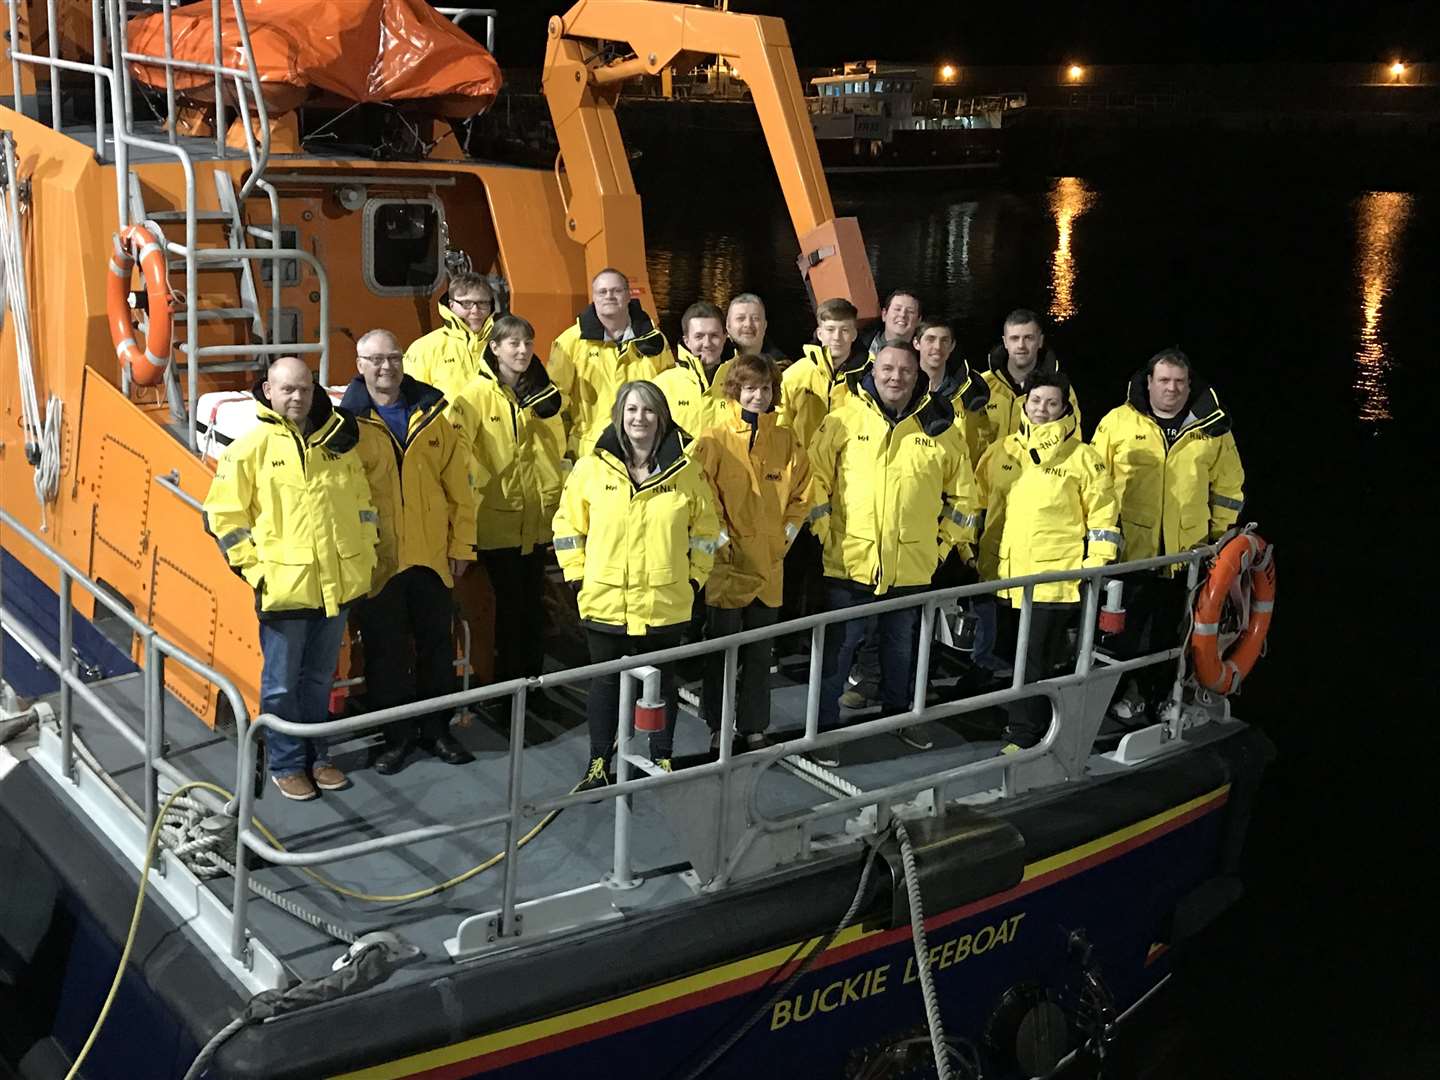 The winners of the 2019 award for emergency services/armed forces hero, RNLI Buckie lifeboat crew.